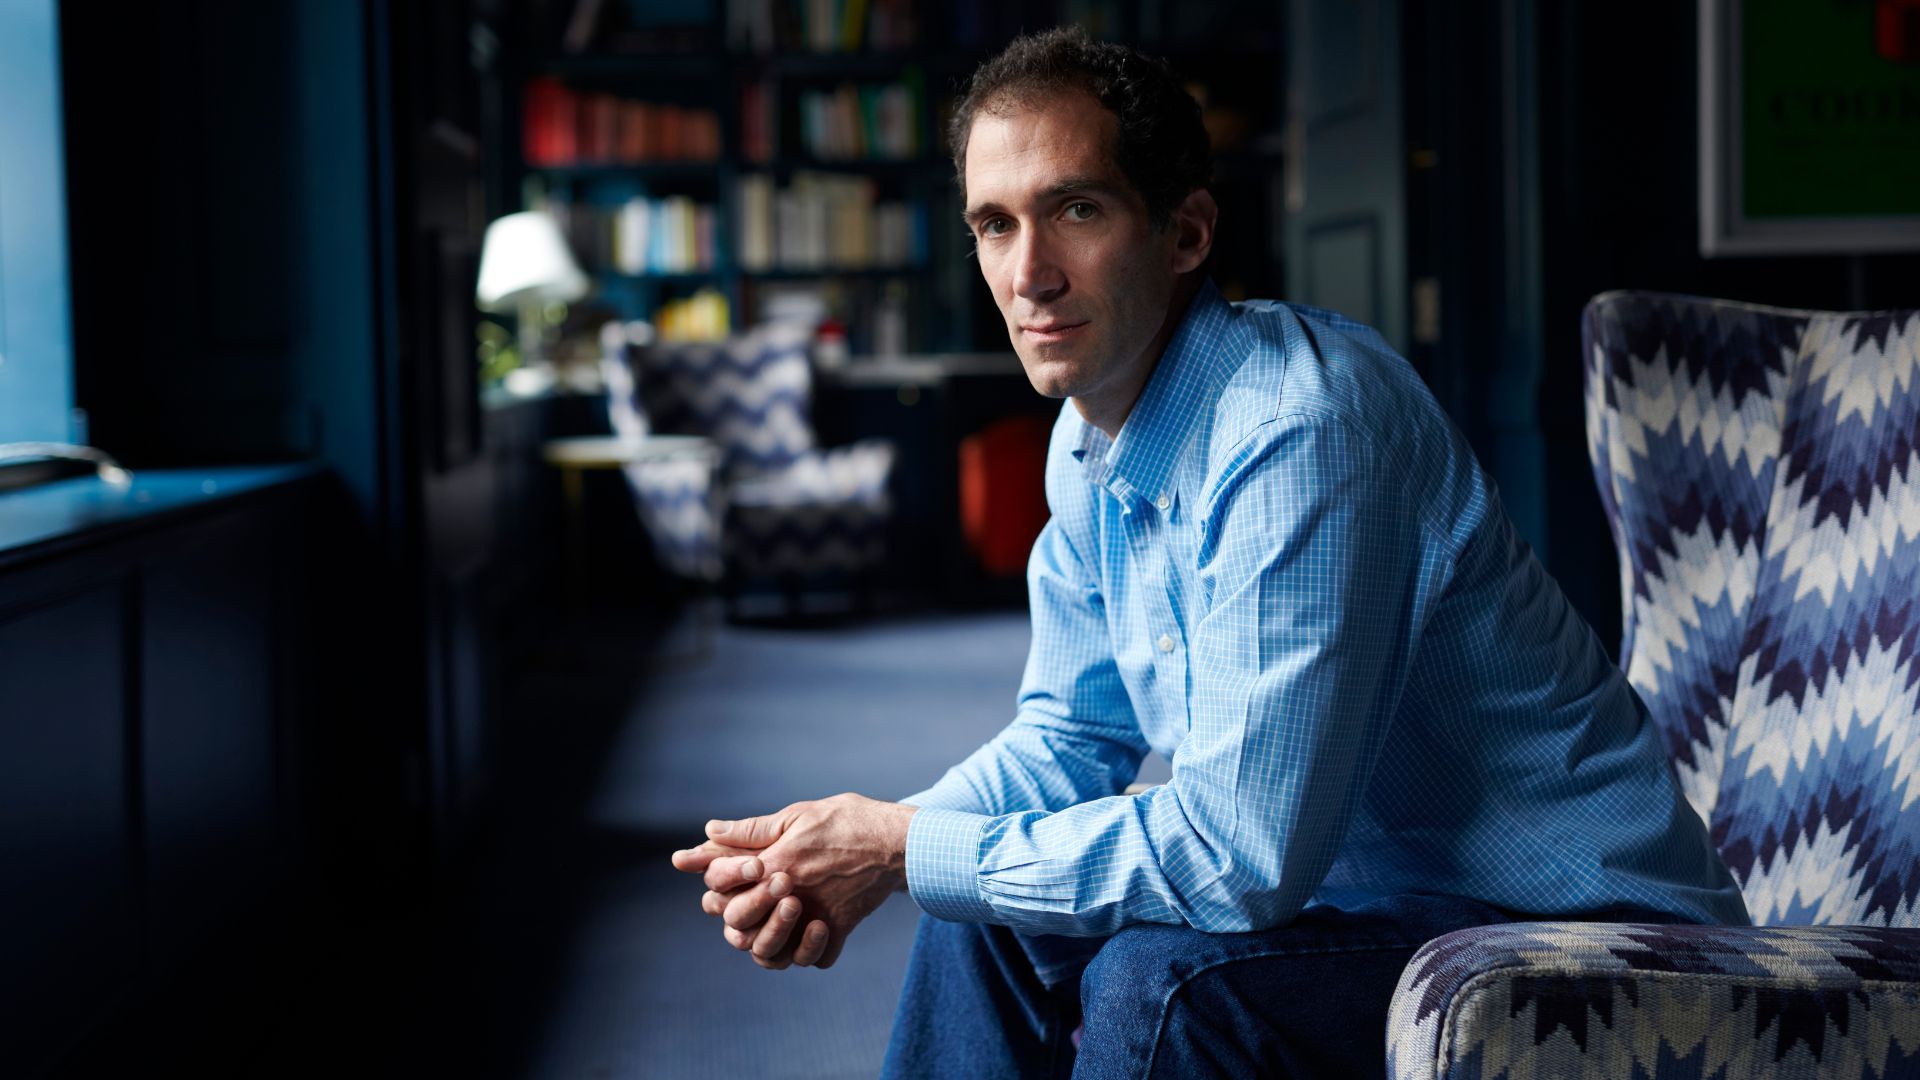 Daniel Mason in conversation about discipline, style and the inspiration for his fourth novel